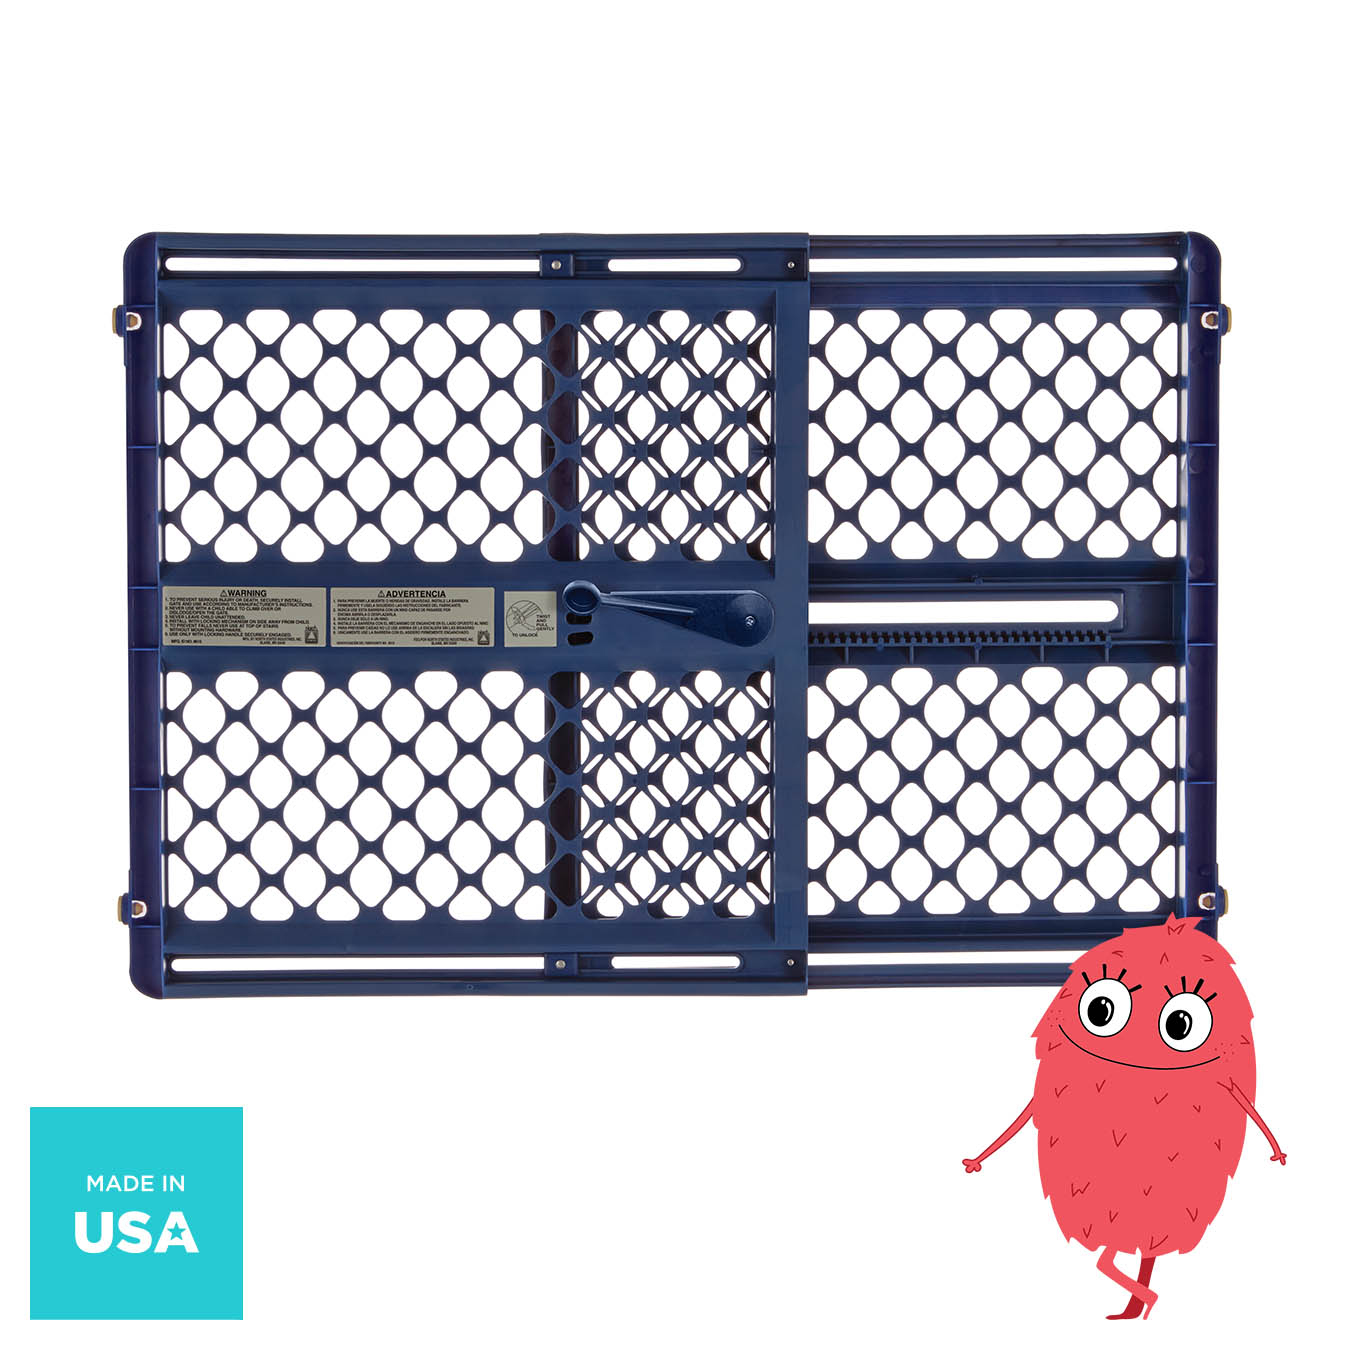 Toddleroo by North States 26"-42" Supergate Classic Baby Safety Gate, Color Navy, Plastic Material, Ages 0+ - image 4 of 6